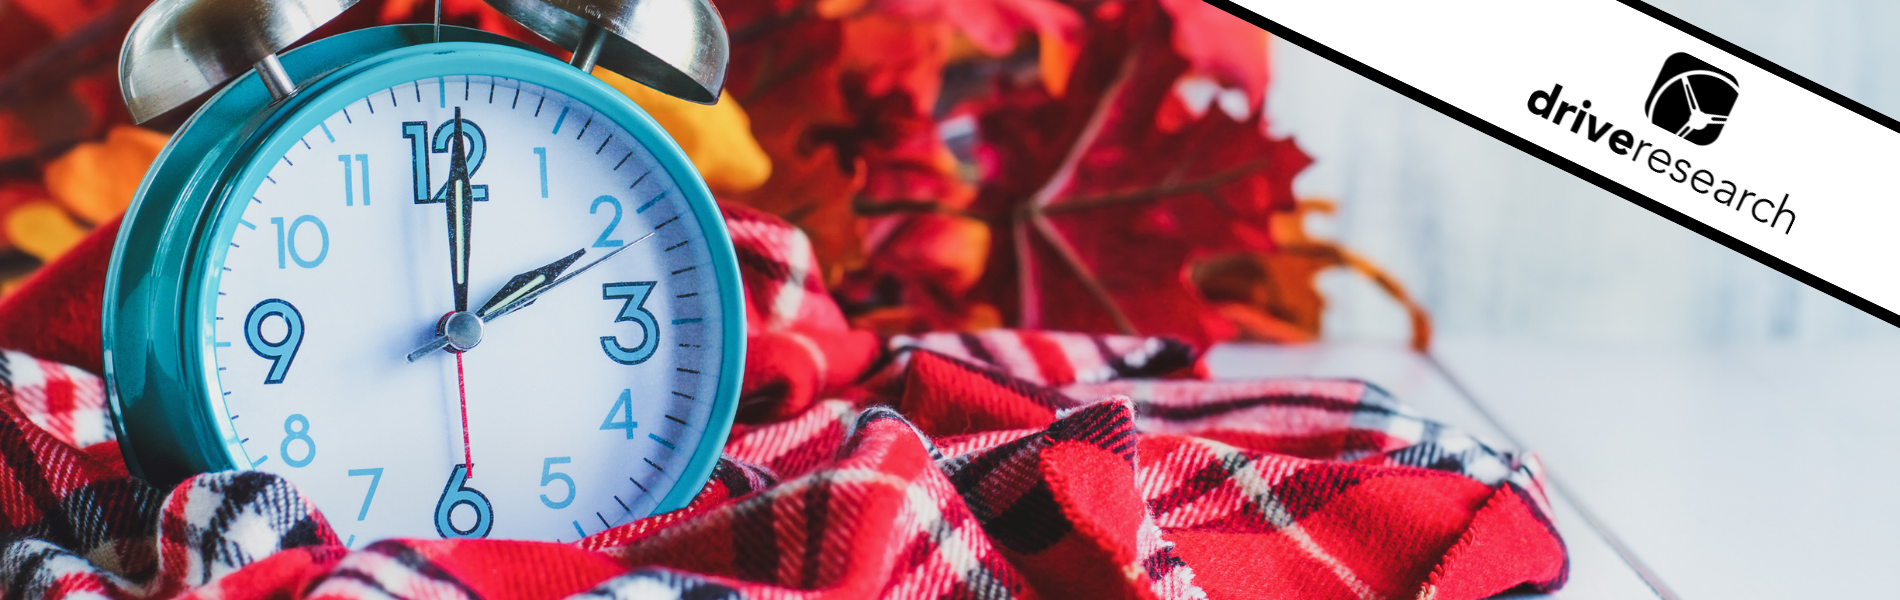 CLOCK IN A BLANKET FOR FALL BACK